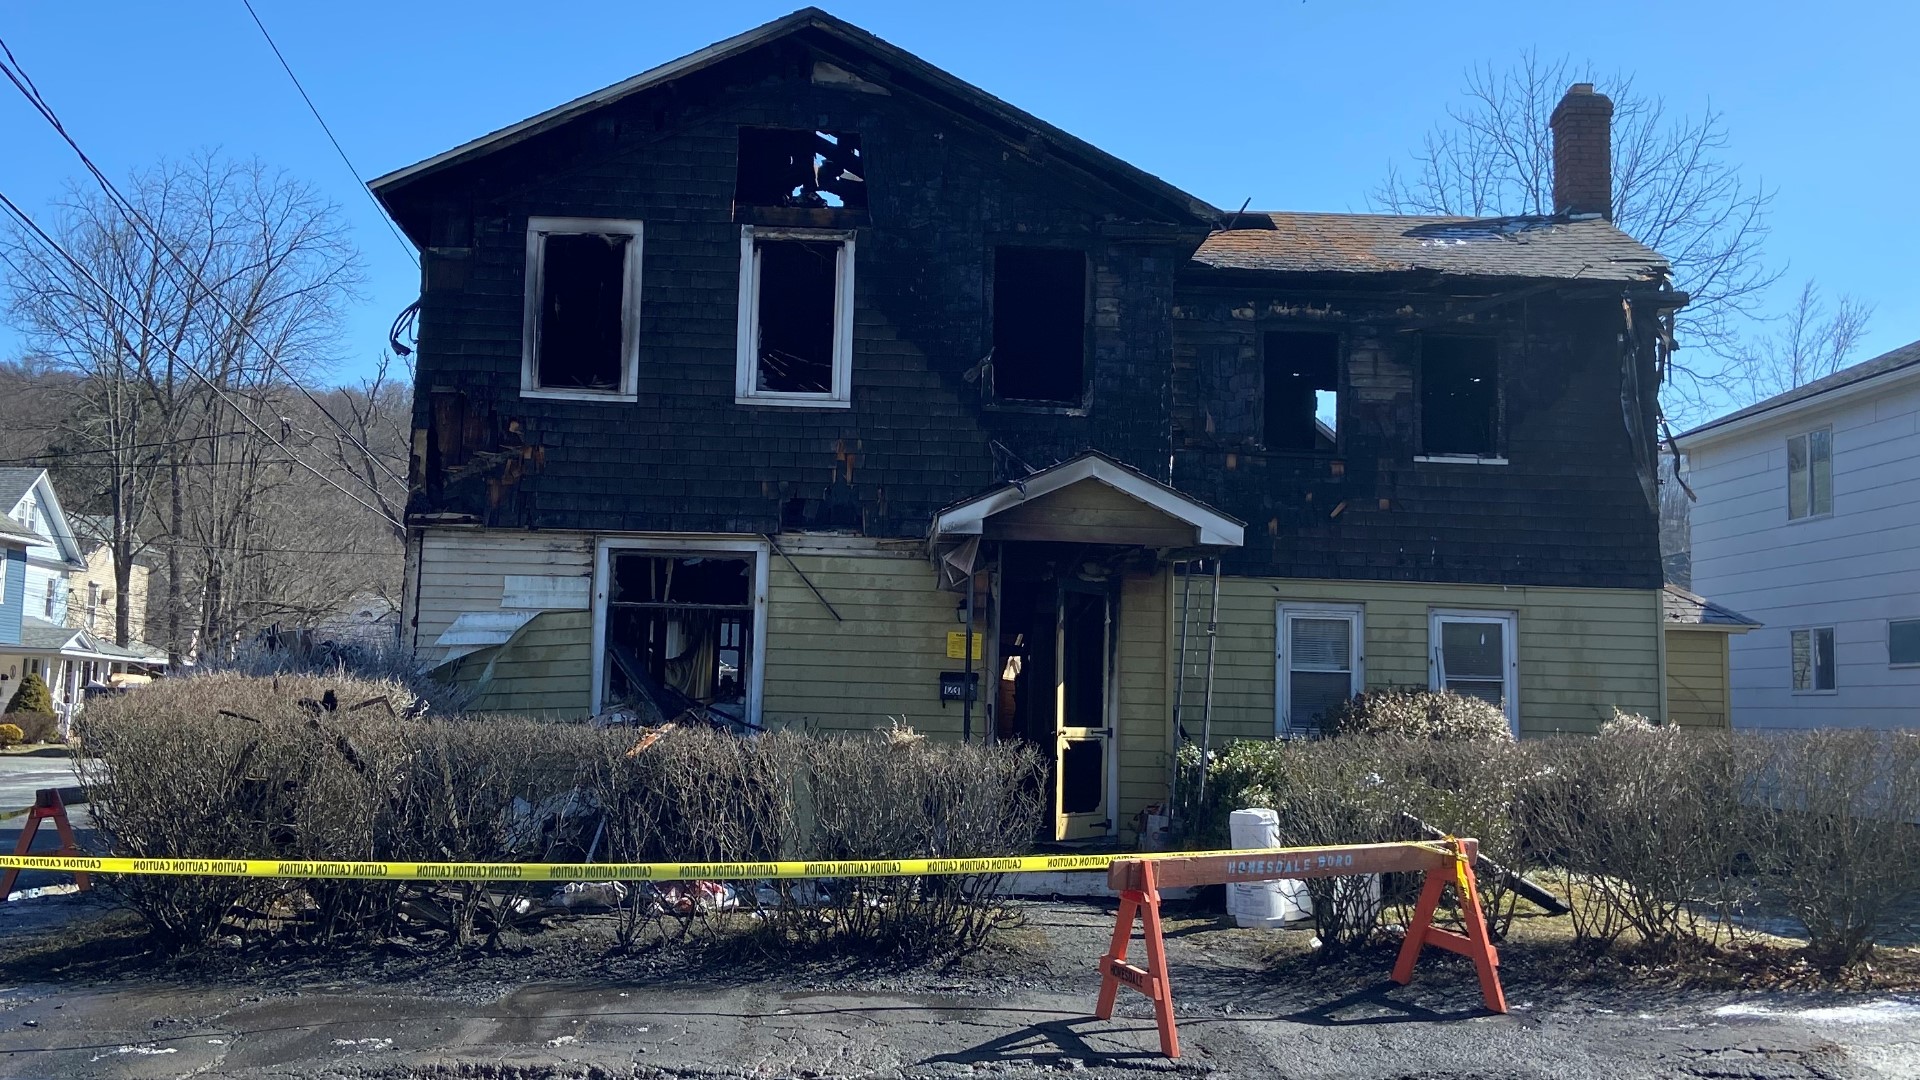 Fire at the place in Wayne County started early Monday.